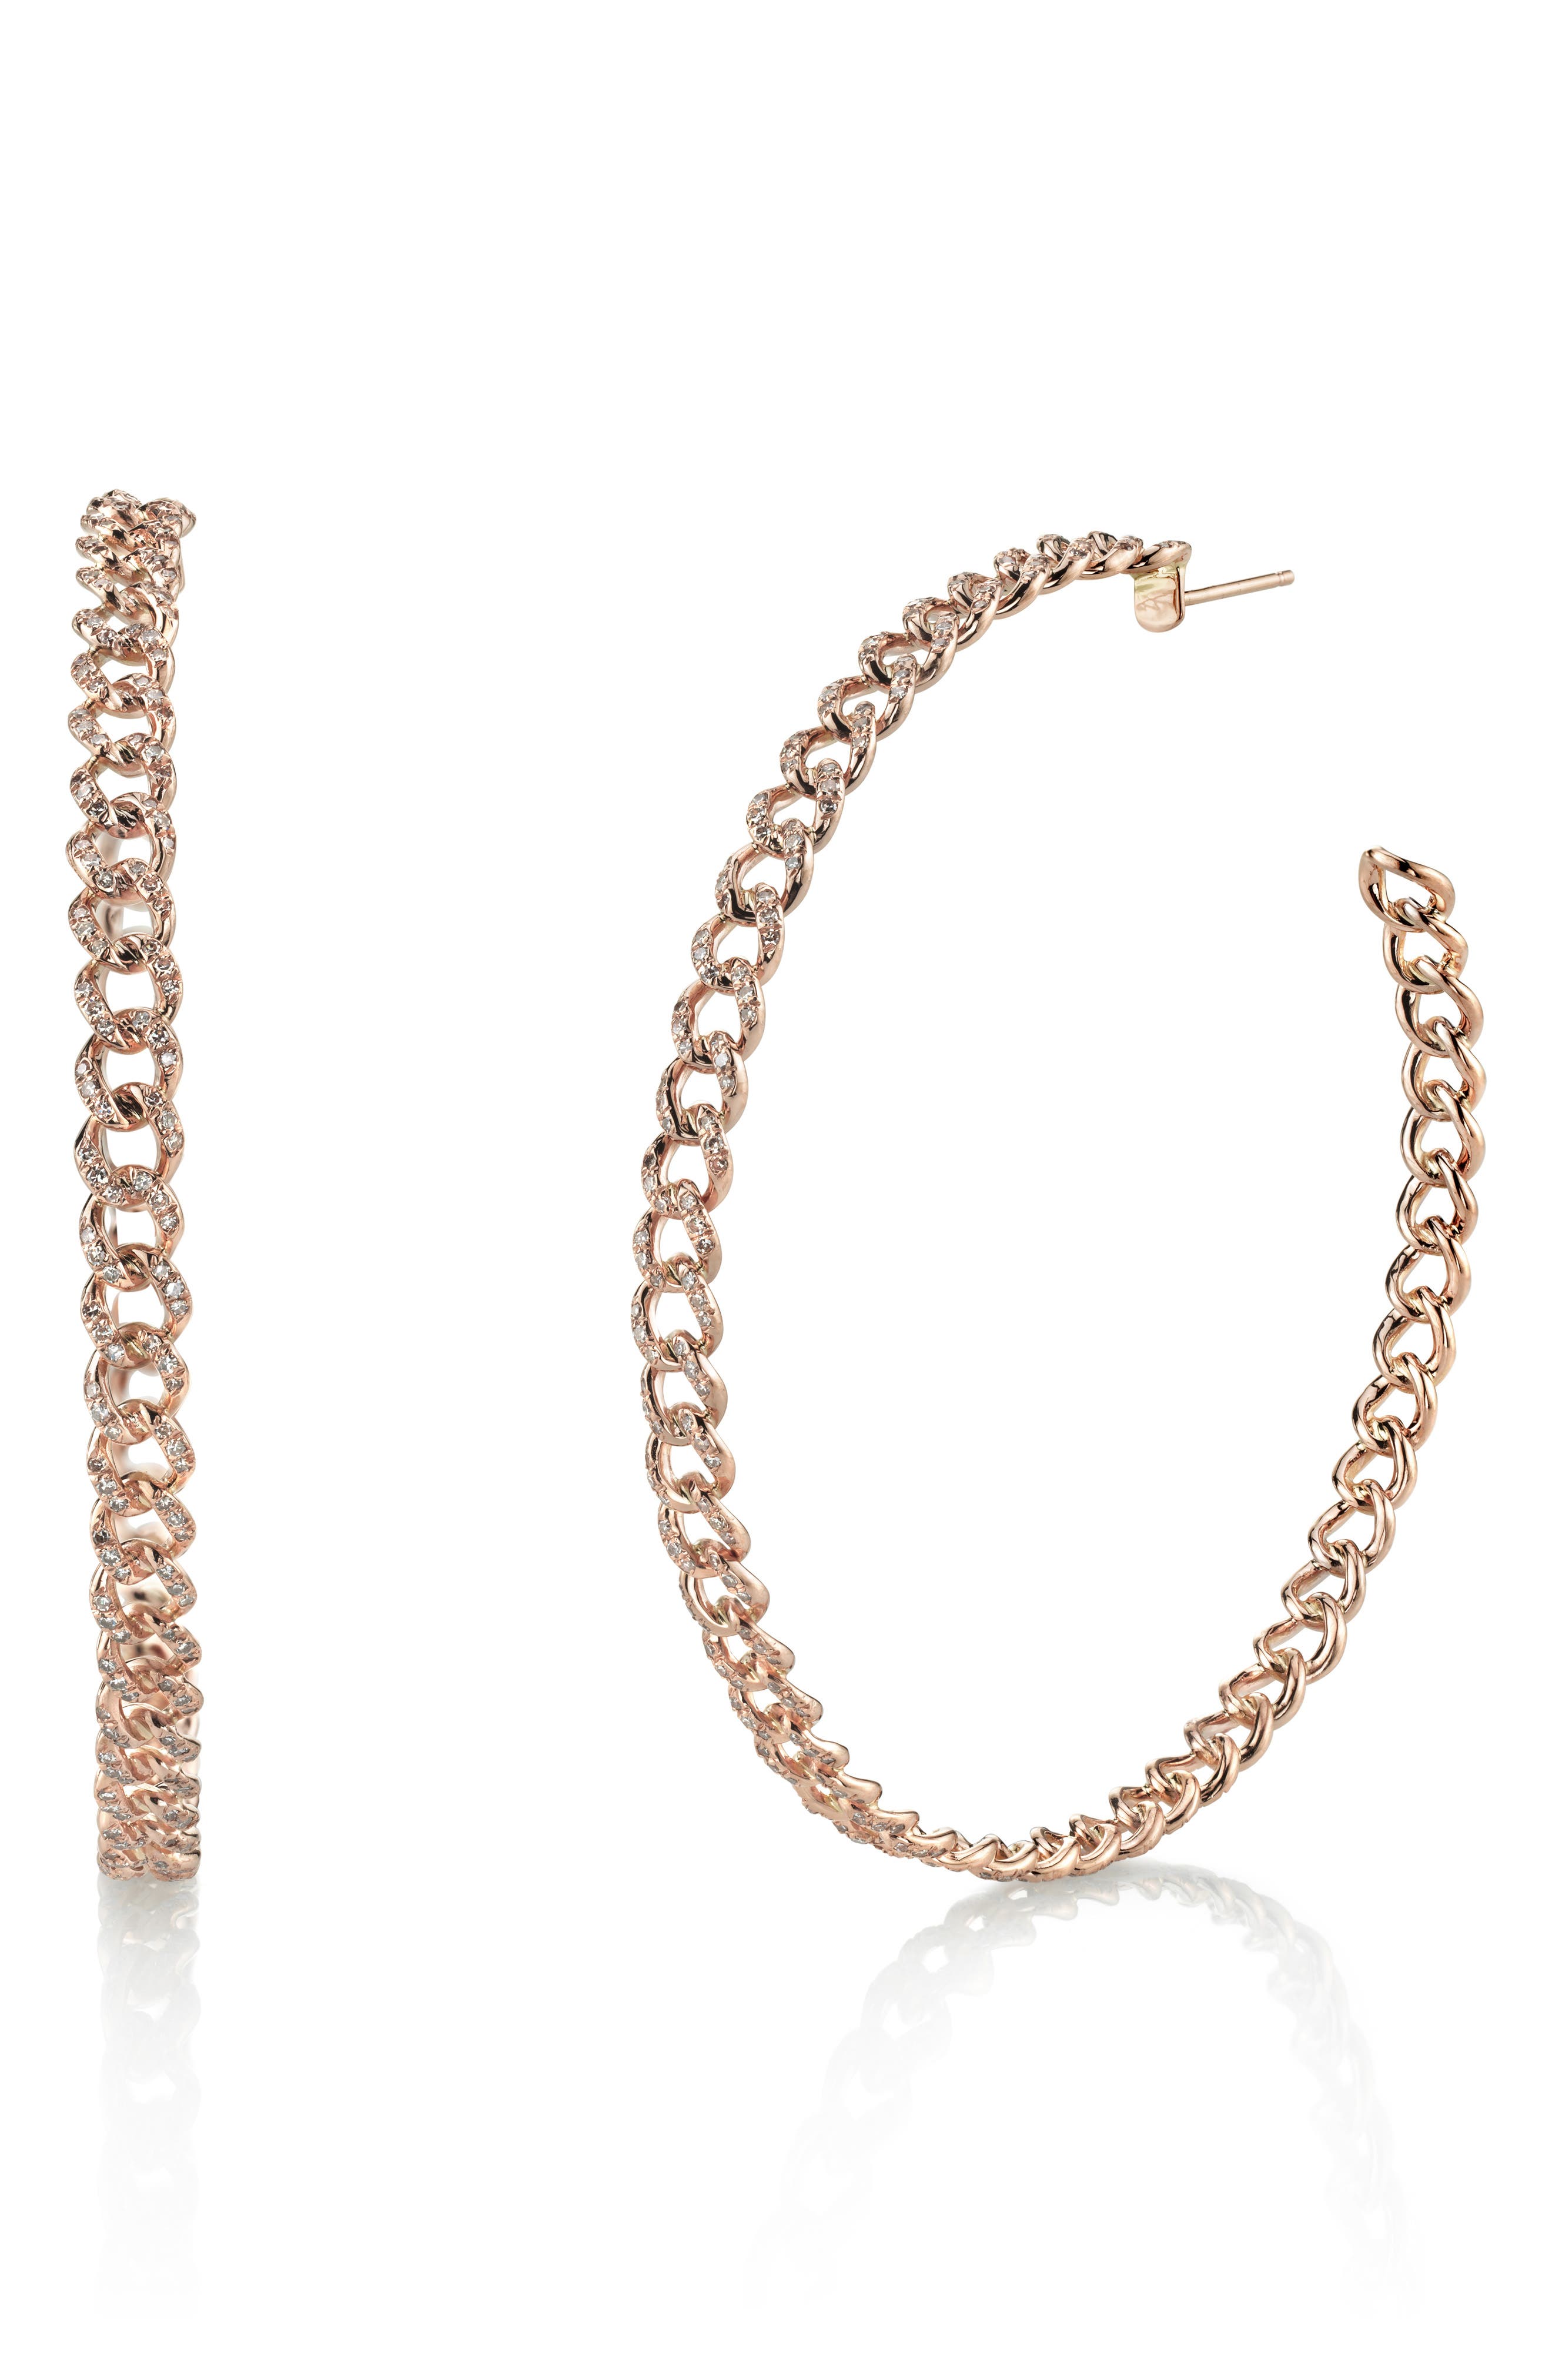 SHAY Large Pave Diamond Chain Link Hoop Earrings in Rose Gold at Nordstrom